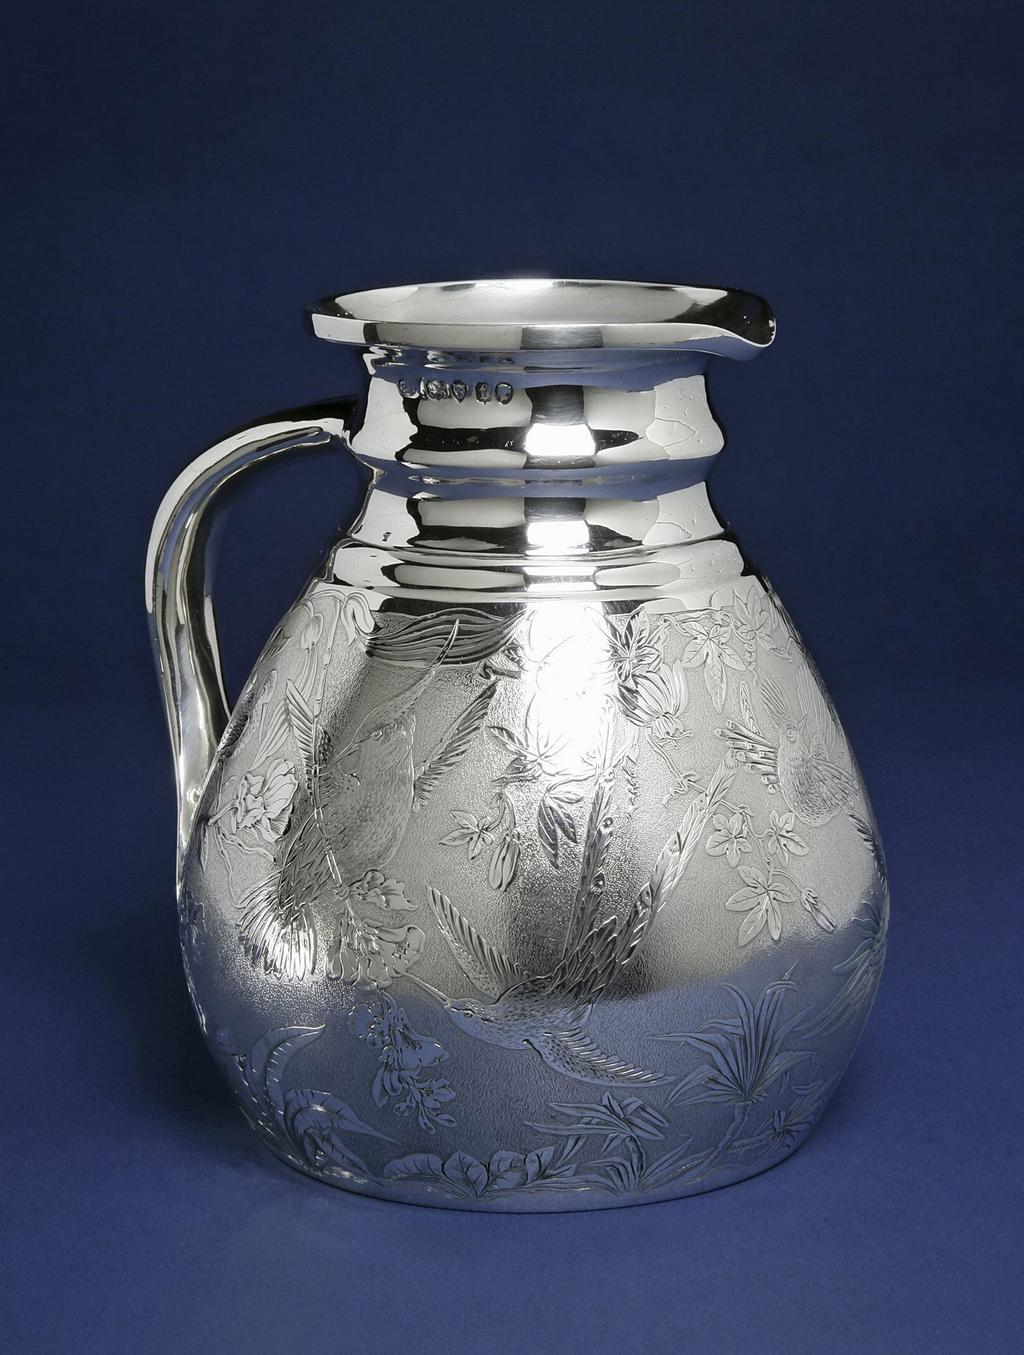 An image of Cambridge ale jug/water jug. Smith, Stephen (British). In the shape of a Cambridge ale jug, the body with sloping cylindrical sides and slightly tucked-in base and flat bottom. The narrow neck with plain moulded rings below a slightly everted rim. The broad handle is concave down the centre and joins the body near the base with a flat spatulate terminal. The sides of the body are matted and engraved with exotic birds and tropical flowers and foliage (including humming birds and passion flowers). The hollow handle was seamed down its length. The body was raised or spun, then the base neck and handle were soldered on. The body was engraved, and the interior gilt. Height, to the rim, 18.2 cm, width, overall, 17 cm, weight, whole, 845 g, 1874-1875. Aesthetic Movement. Victorian. England, London.